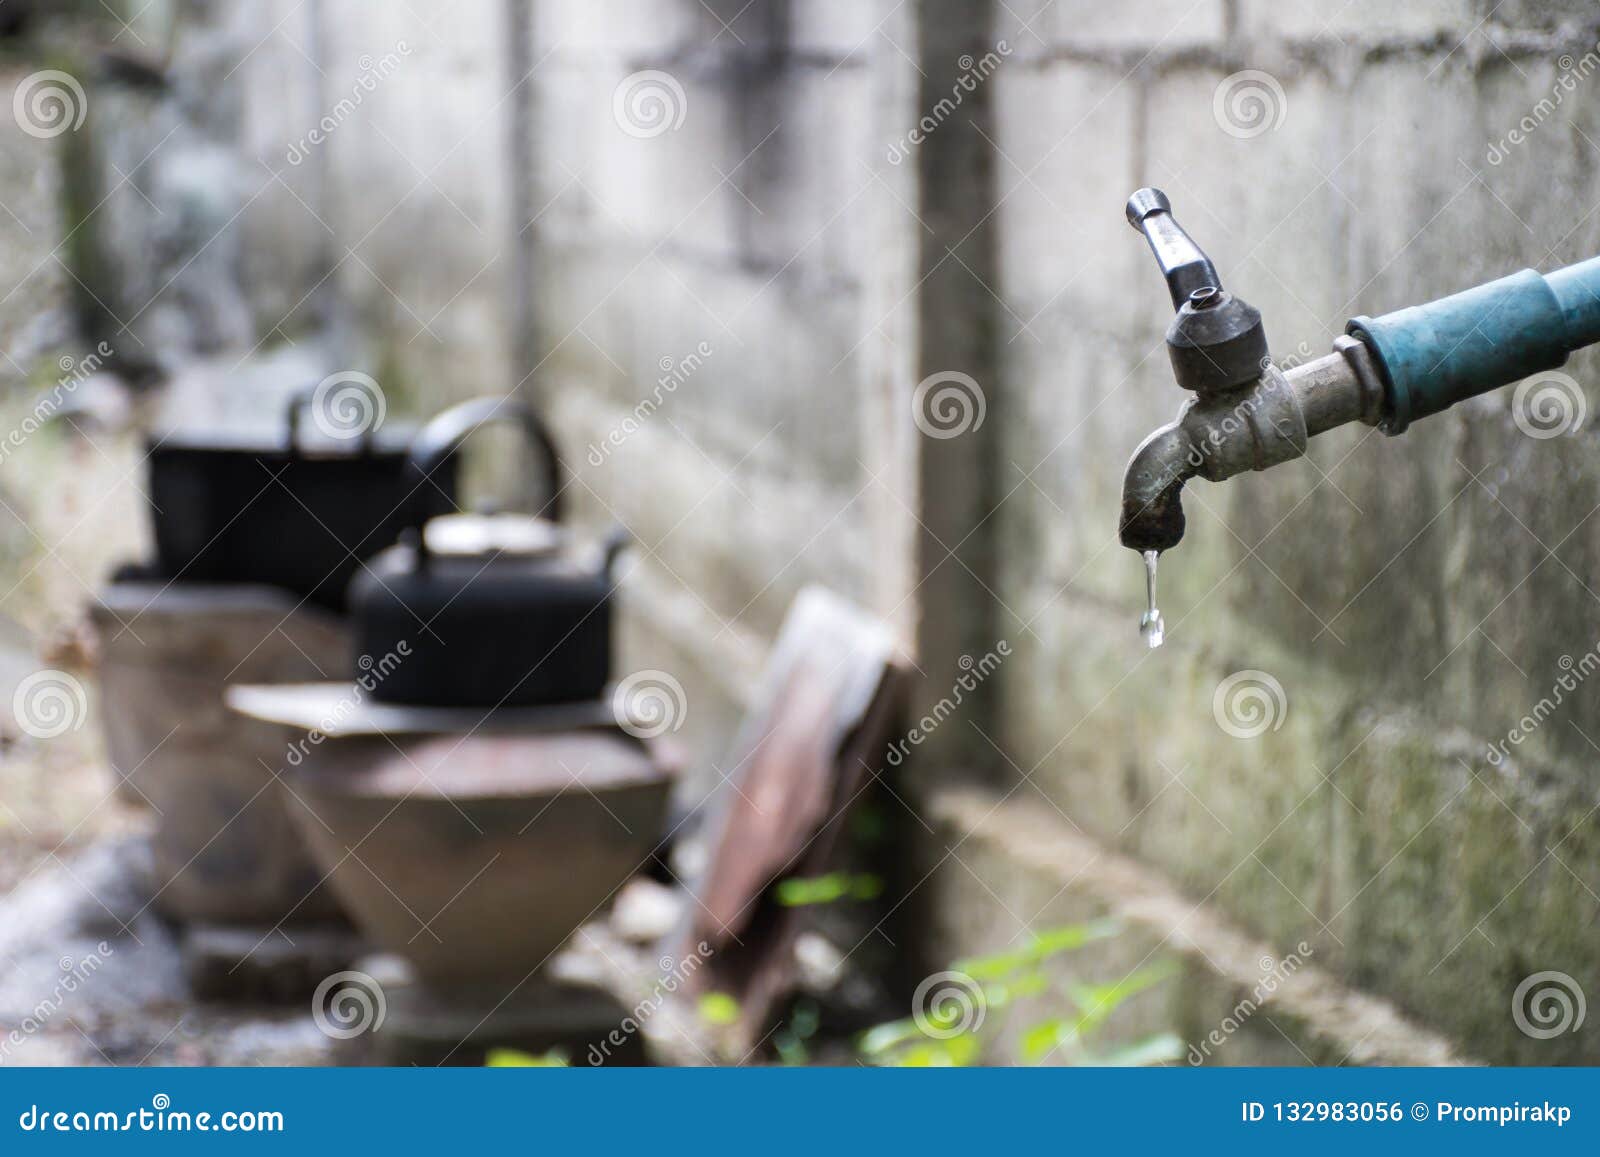 Old Faucet With Water Leaking Drop To The Ground Stock Photo